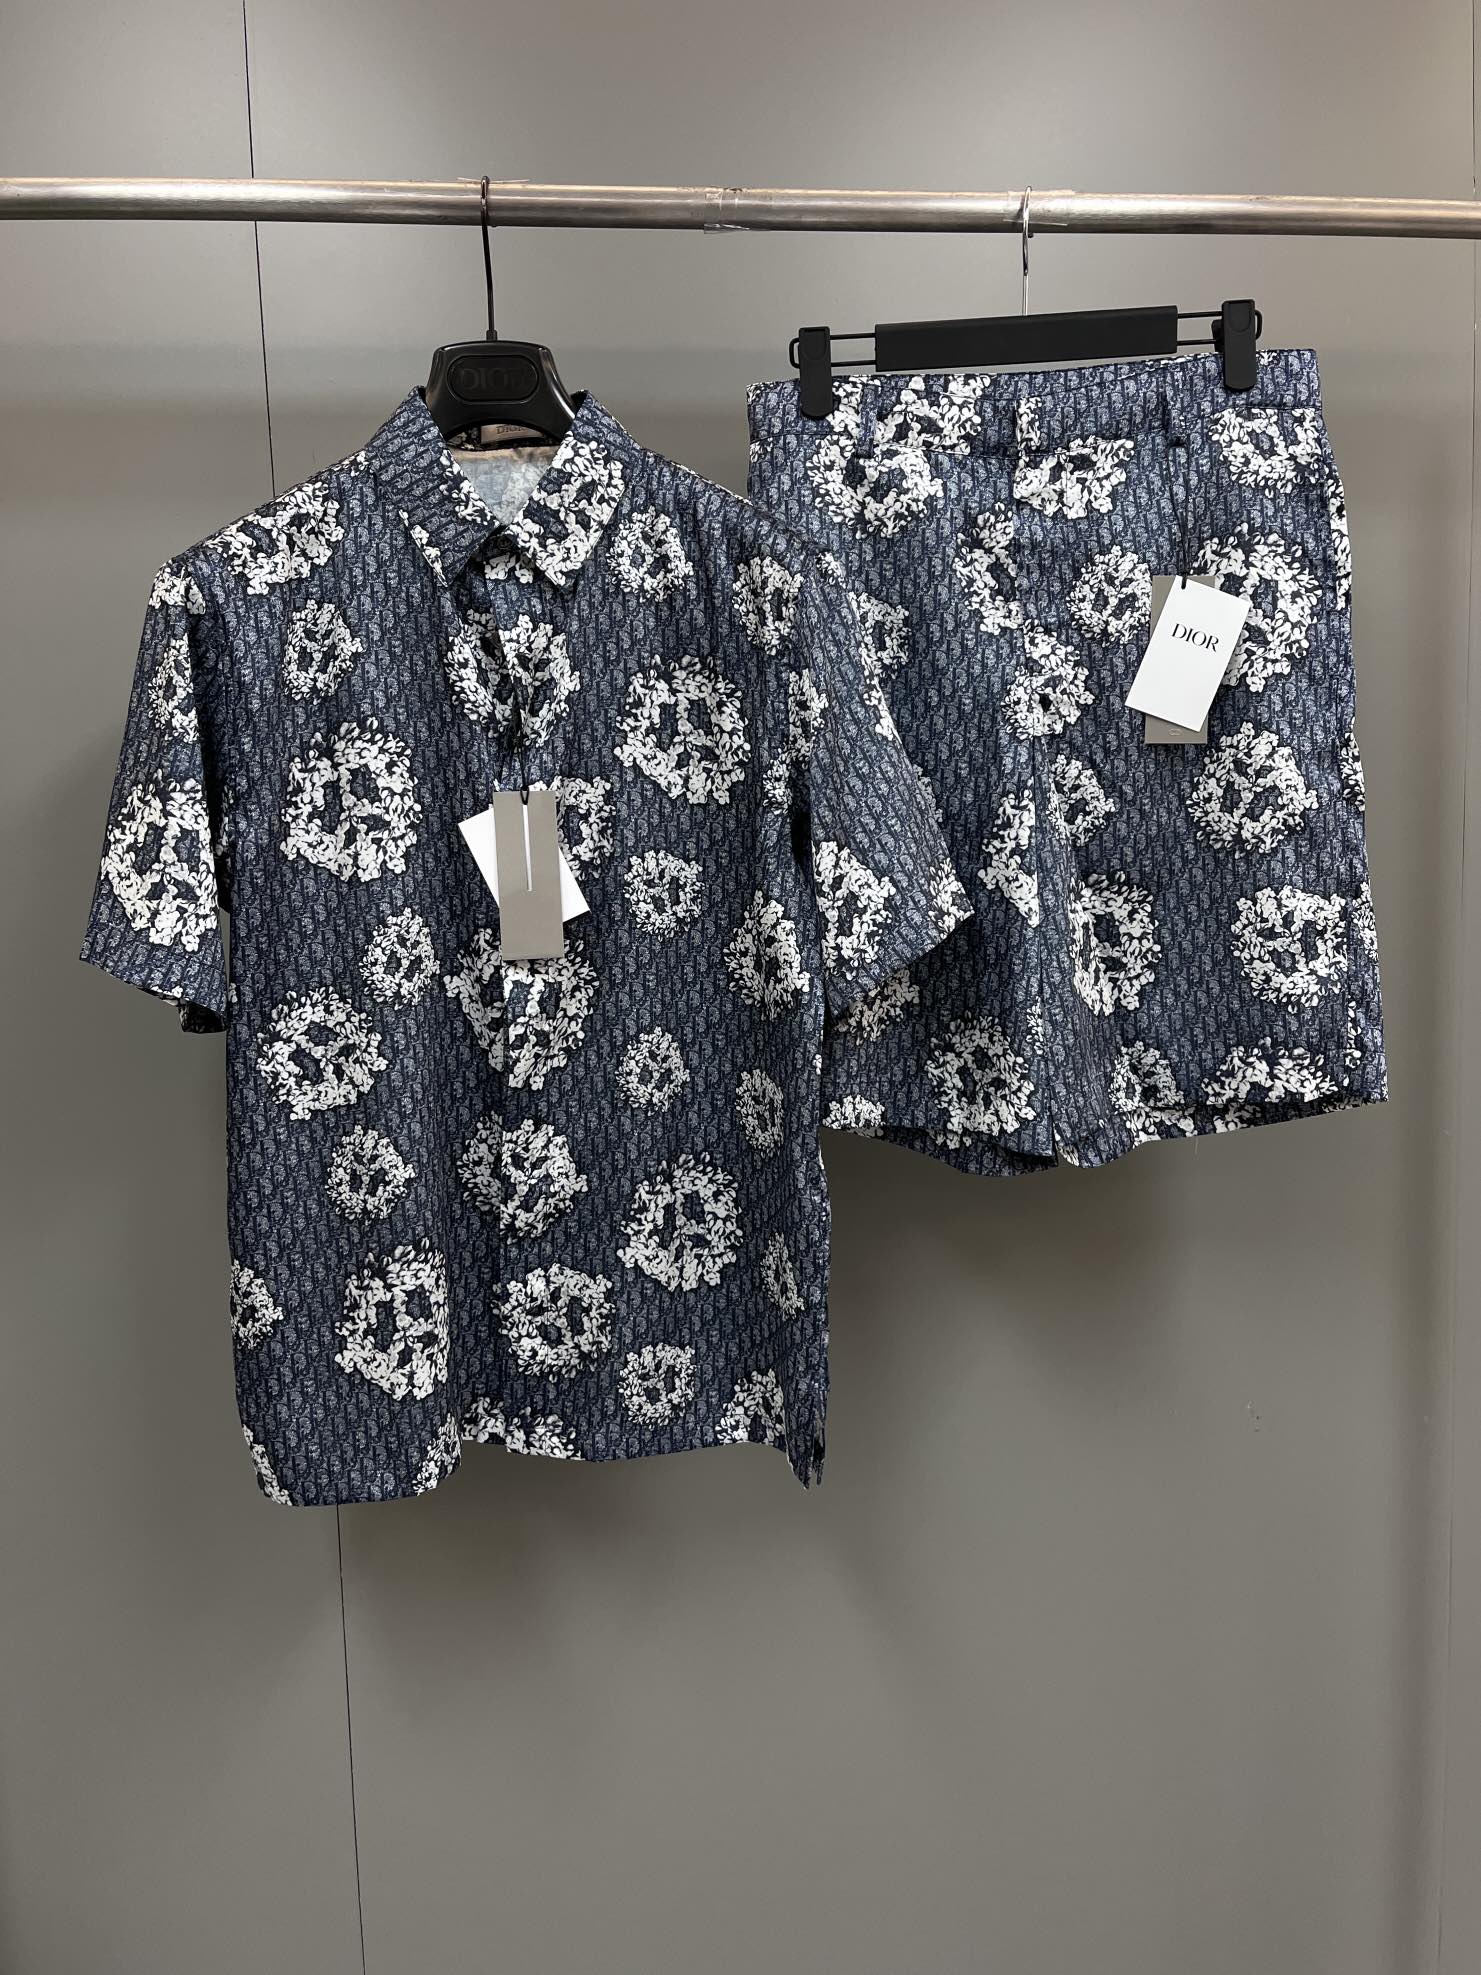 Dior Clothing Shirts & Blouses Shorts Two Piece Outfits & Matching Sets Blue Printing Cotton Polyester Silk Fall Collection Oblique Short Sleeve